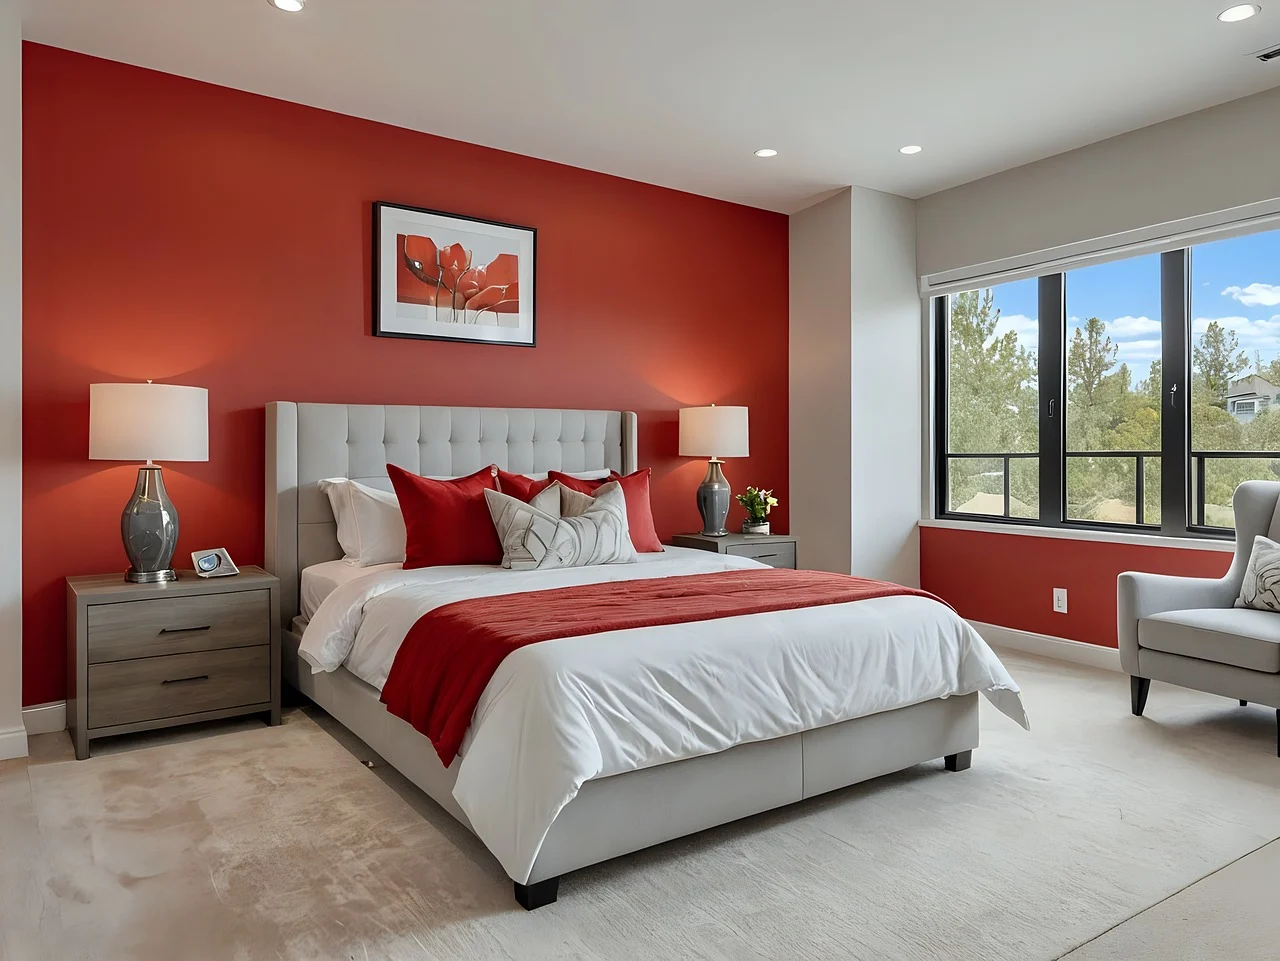 an image of interior design with red wall and bed